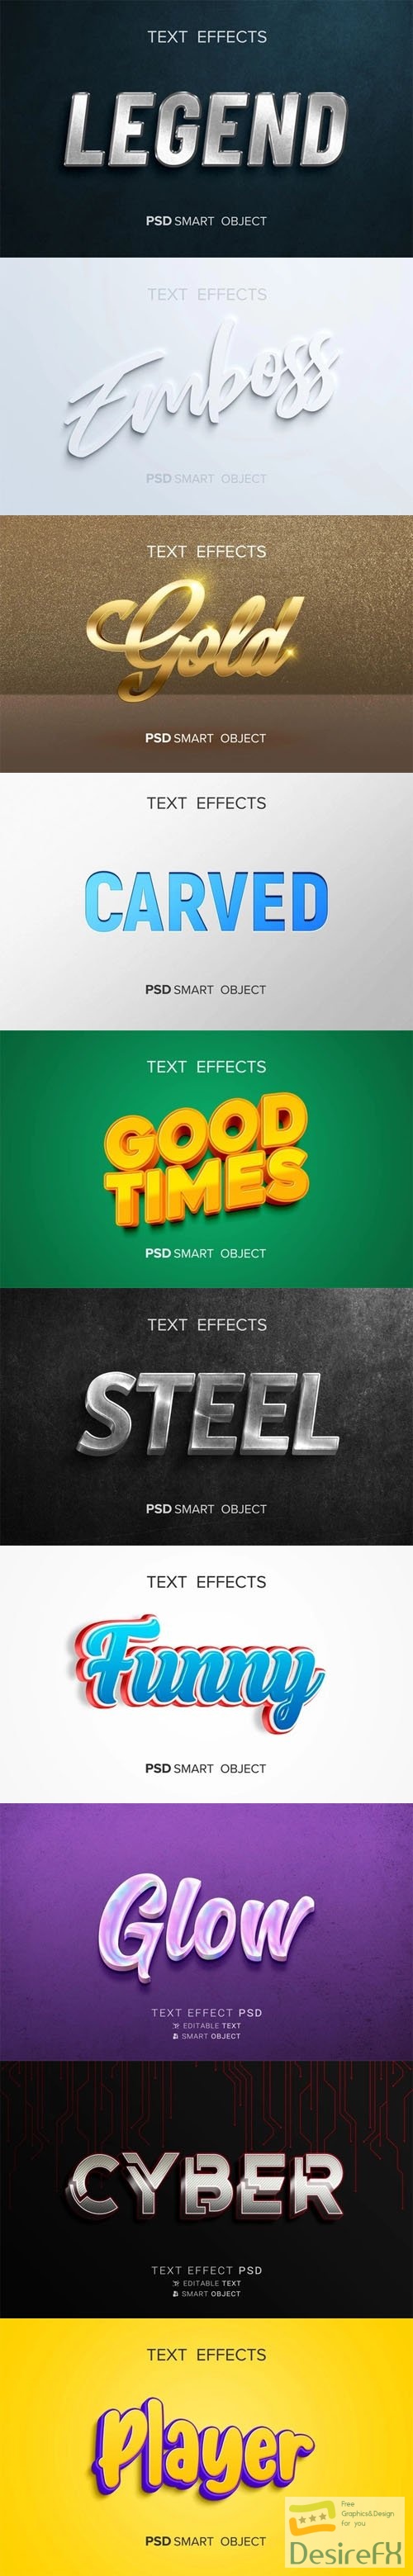 10 Creative Photoshop Text Effects